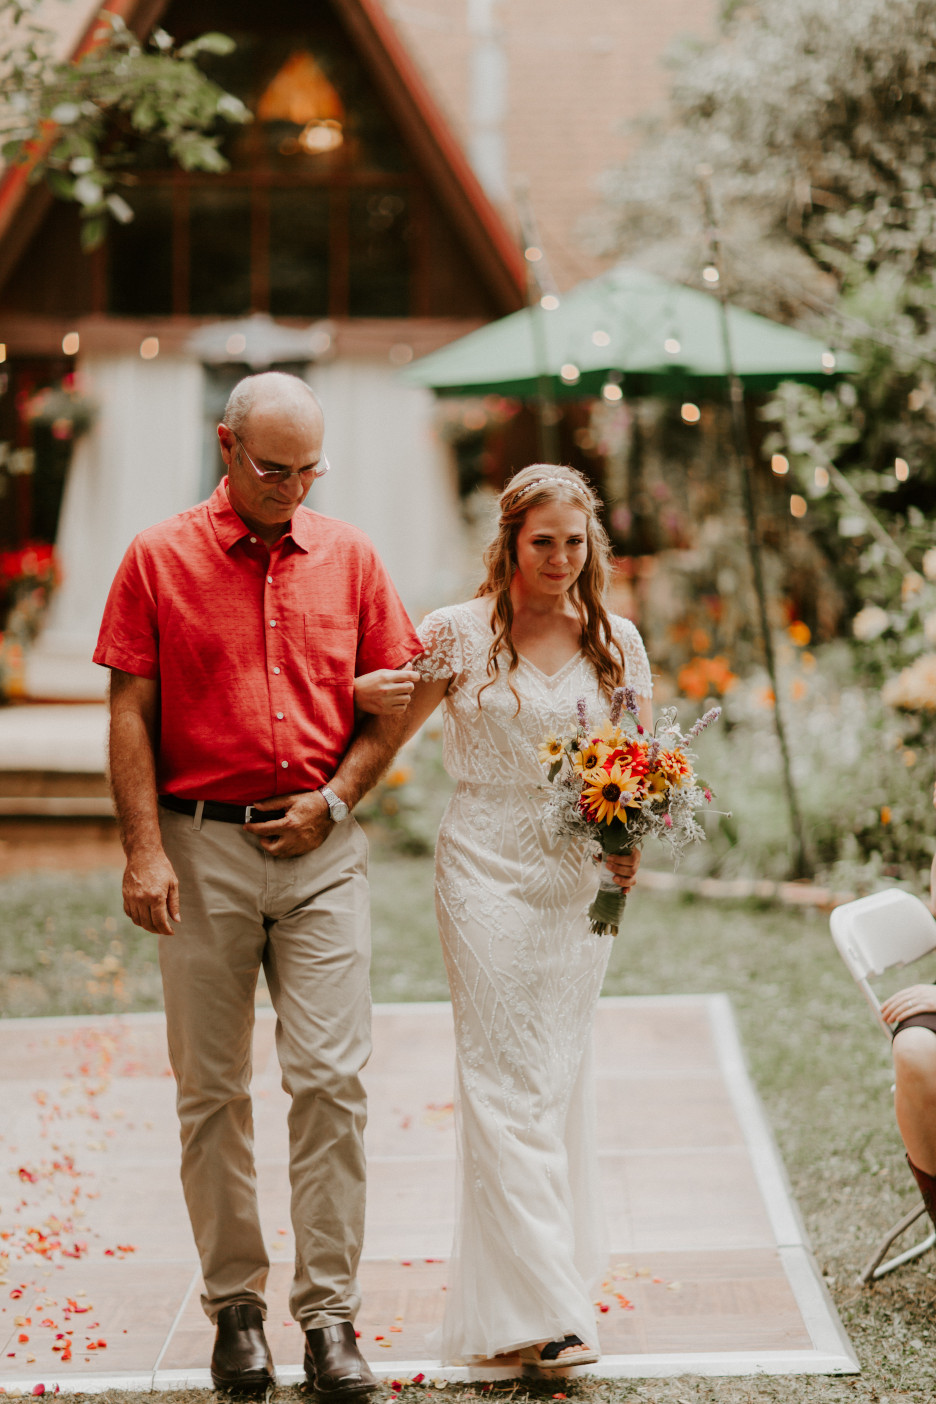 Hannah's father walks her down the aisle in Corvallis, Oregon. Intimate wedding photography in Corvallis Oregon by Sienna Plus Josh.